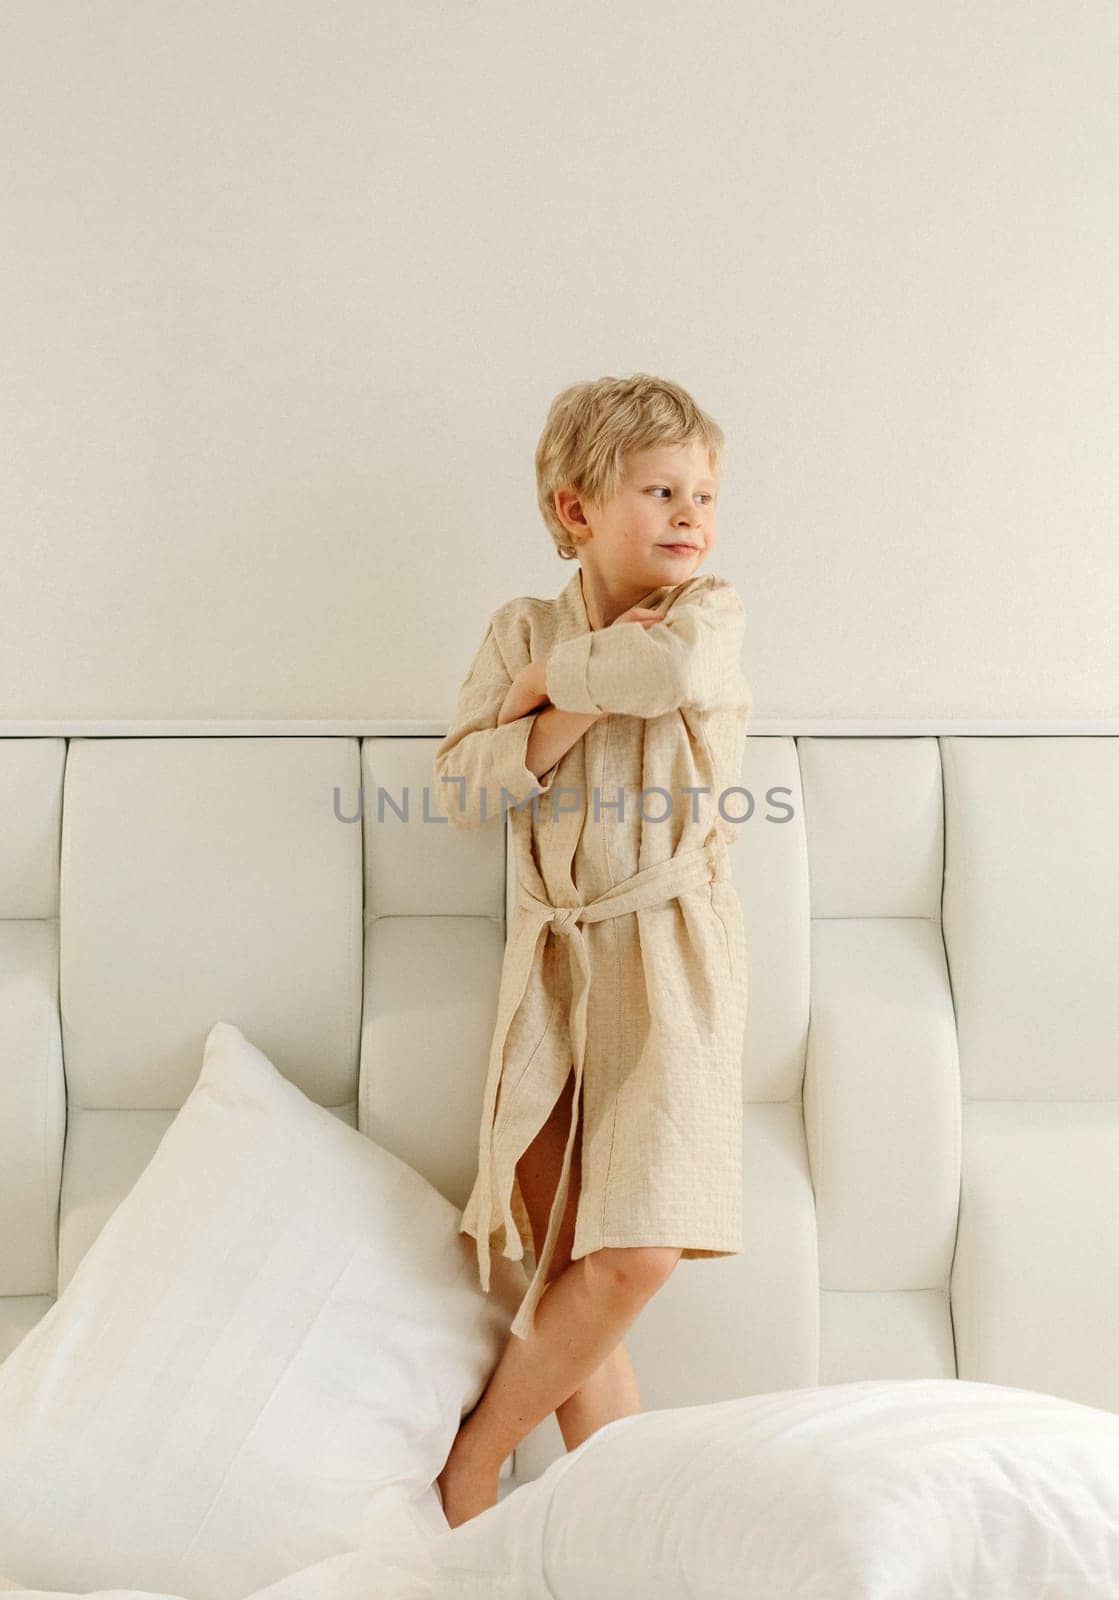 On the bed is a boy in a dressing gown with his arms crossed over his chest.